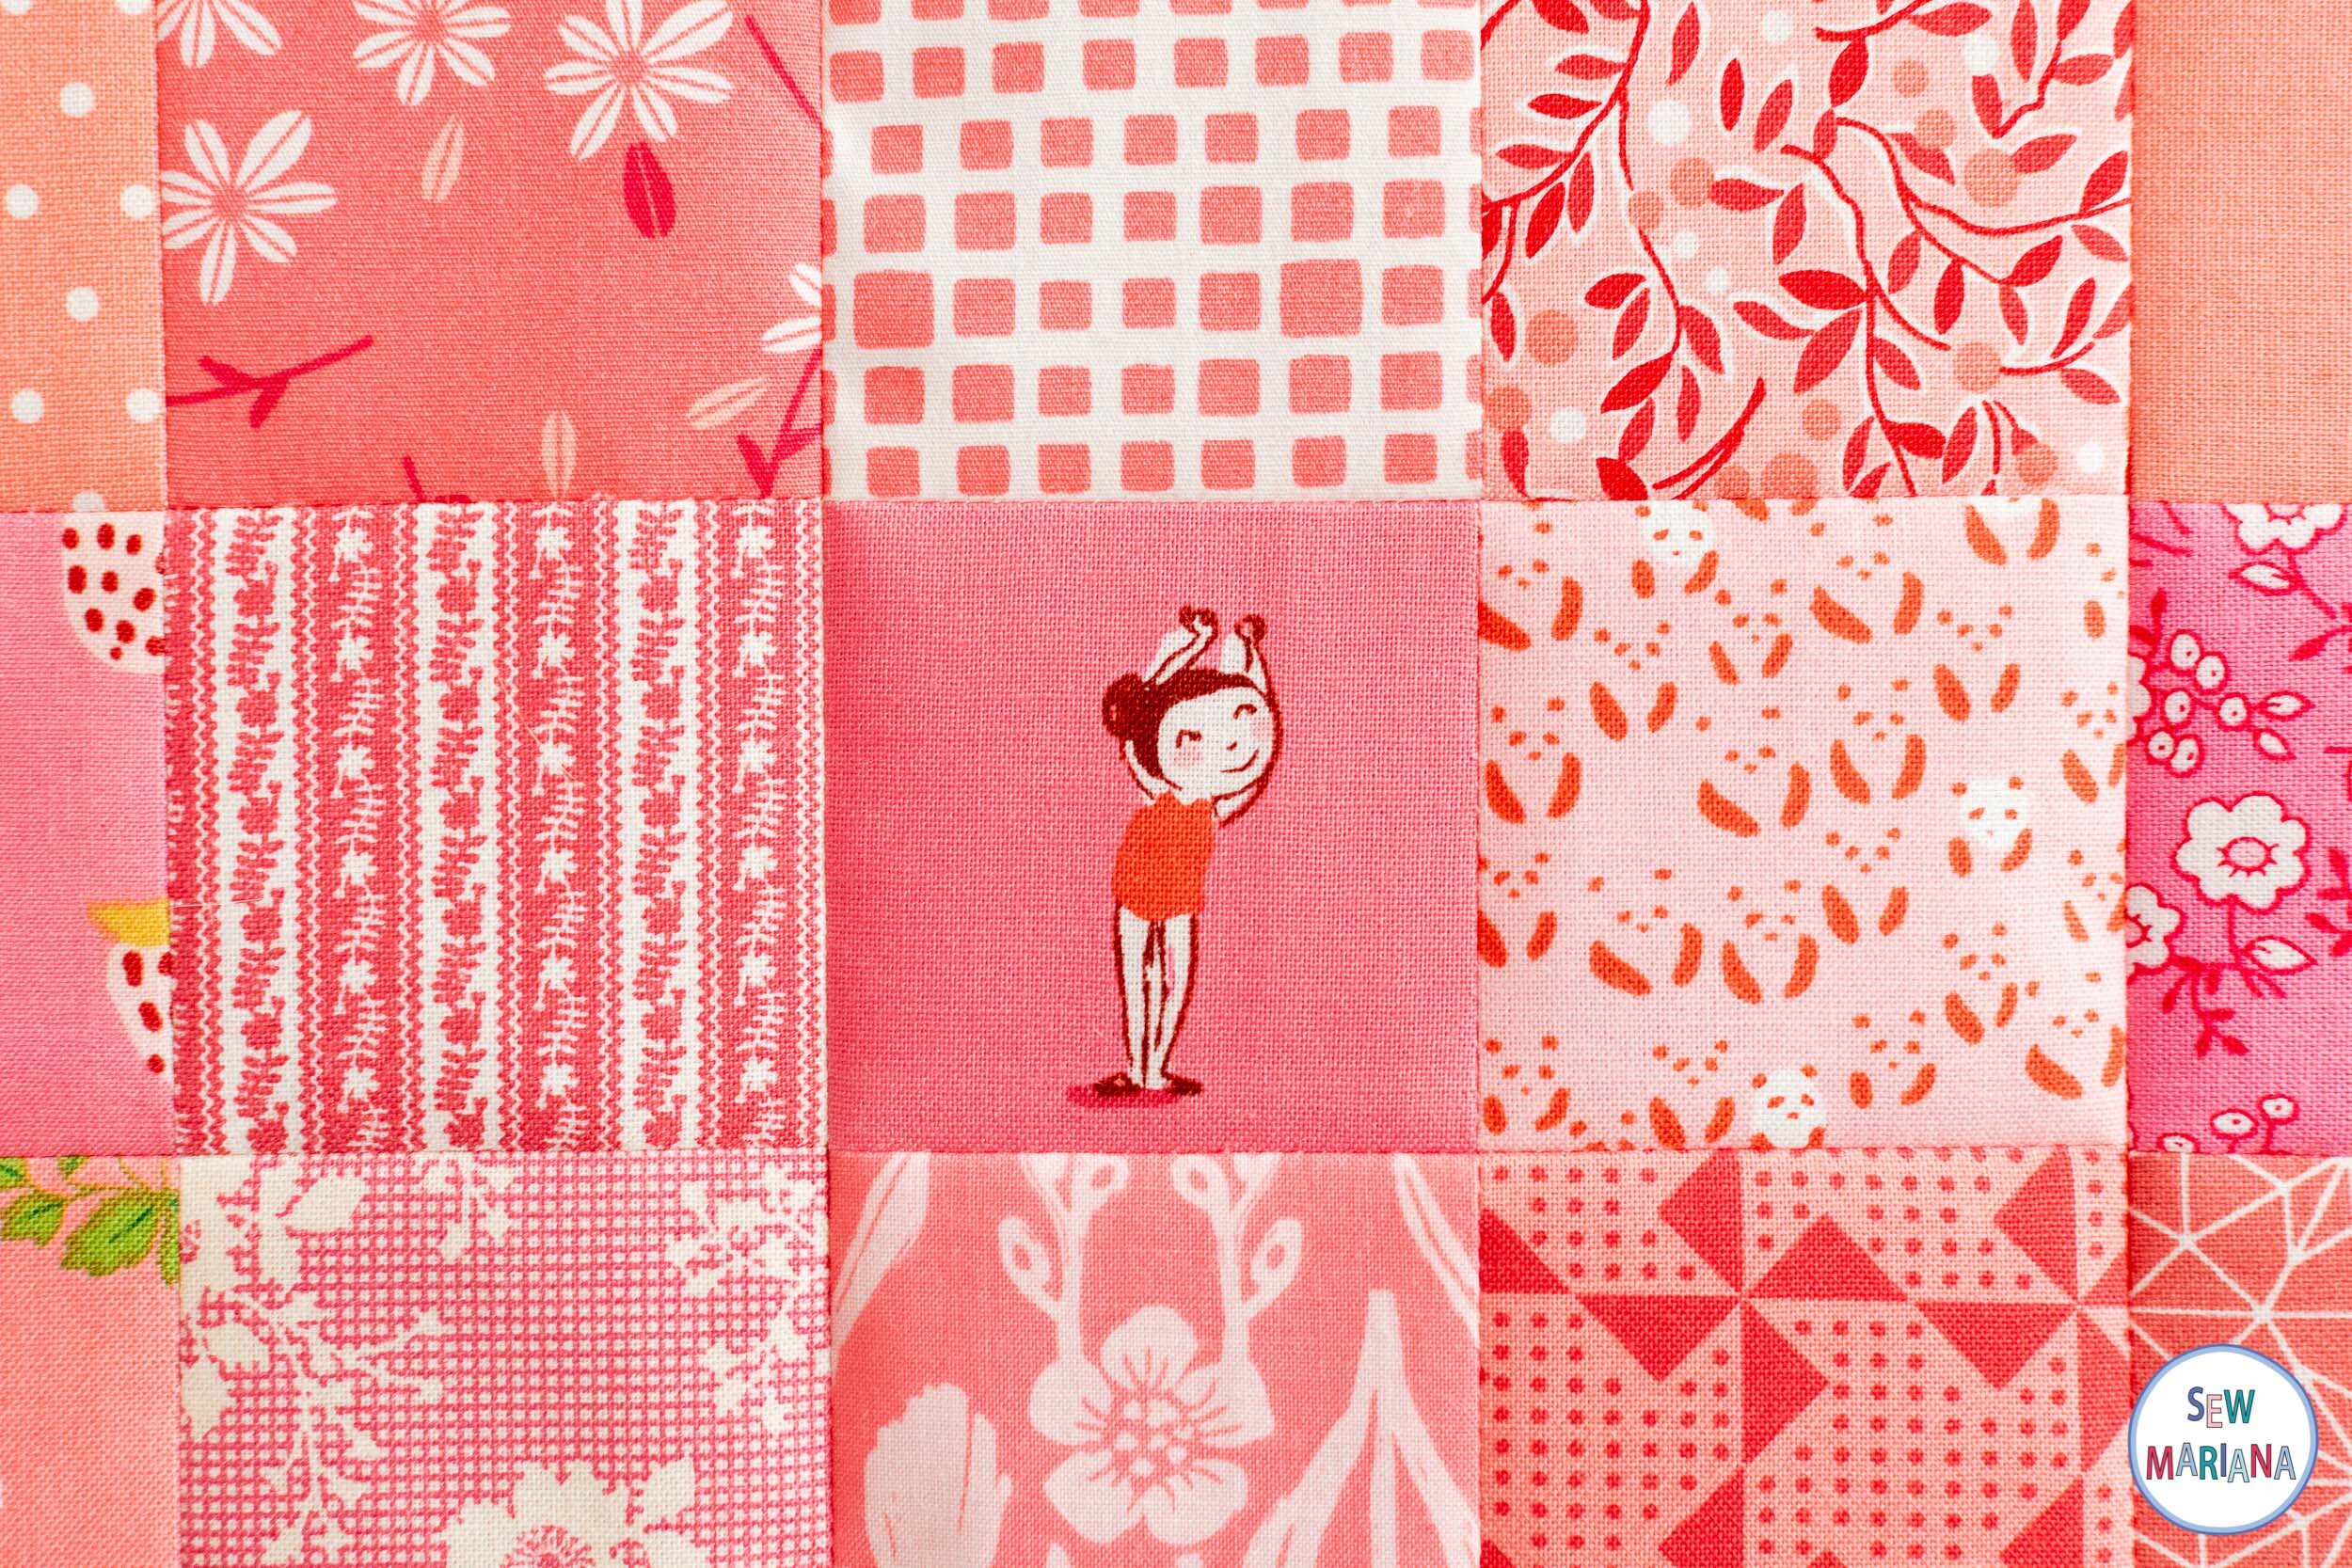 Detail of a square of fabric in pink with a girl